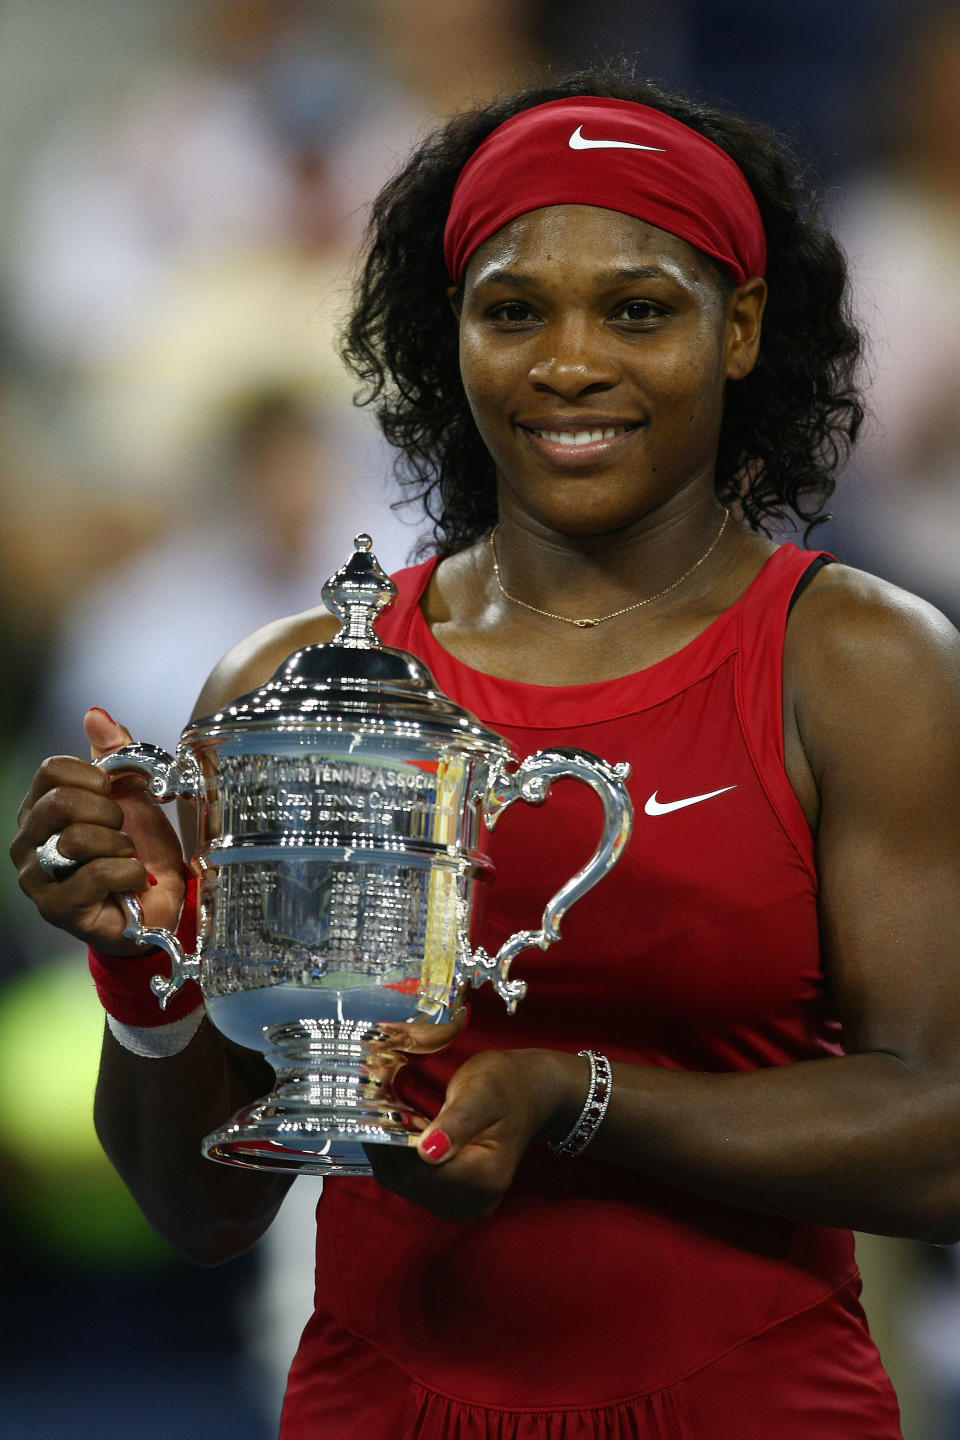 Serena Williams of the United States poses with the championship trophy after defeating Jelena Jankovic of Serbia in the women's singles finals on Day 14 of the 2008 U.S. Open at the USTA Billie Jean King National Tennis Center on September 7, 2008 in the Flushing neighborhood of the Queens borough of New York City. (Photo by Chris McGrath/Getty Images)